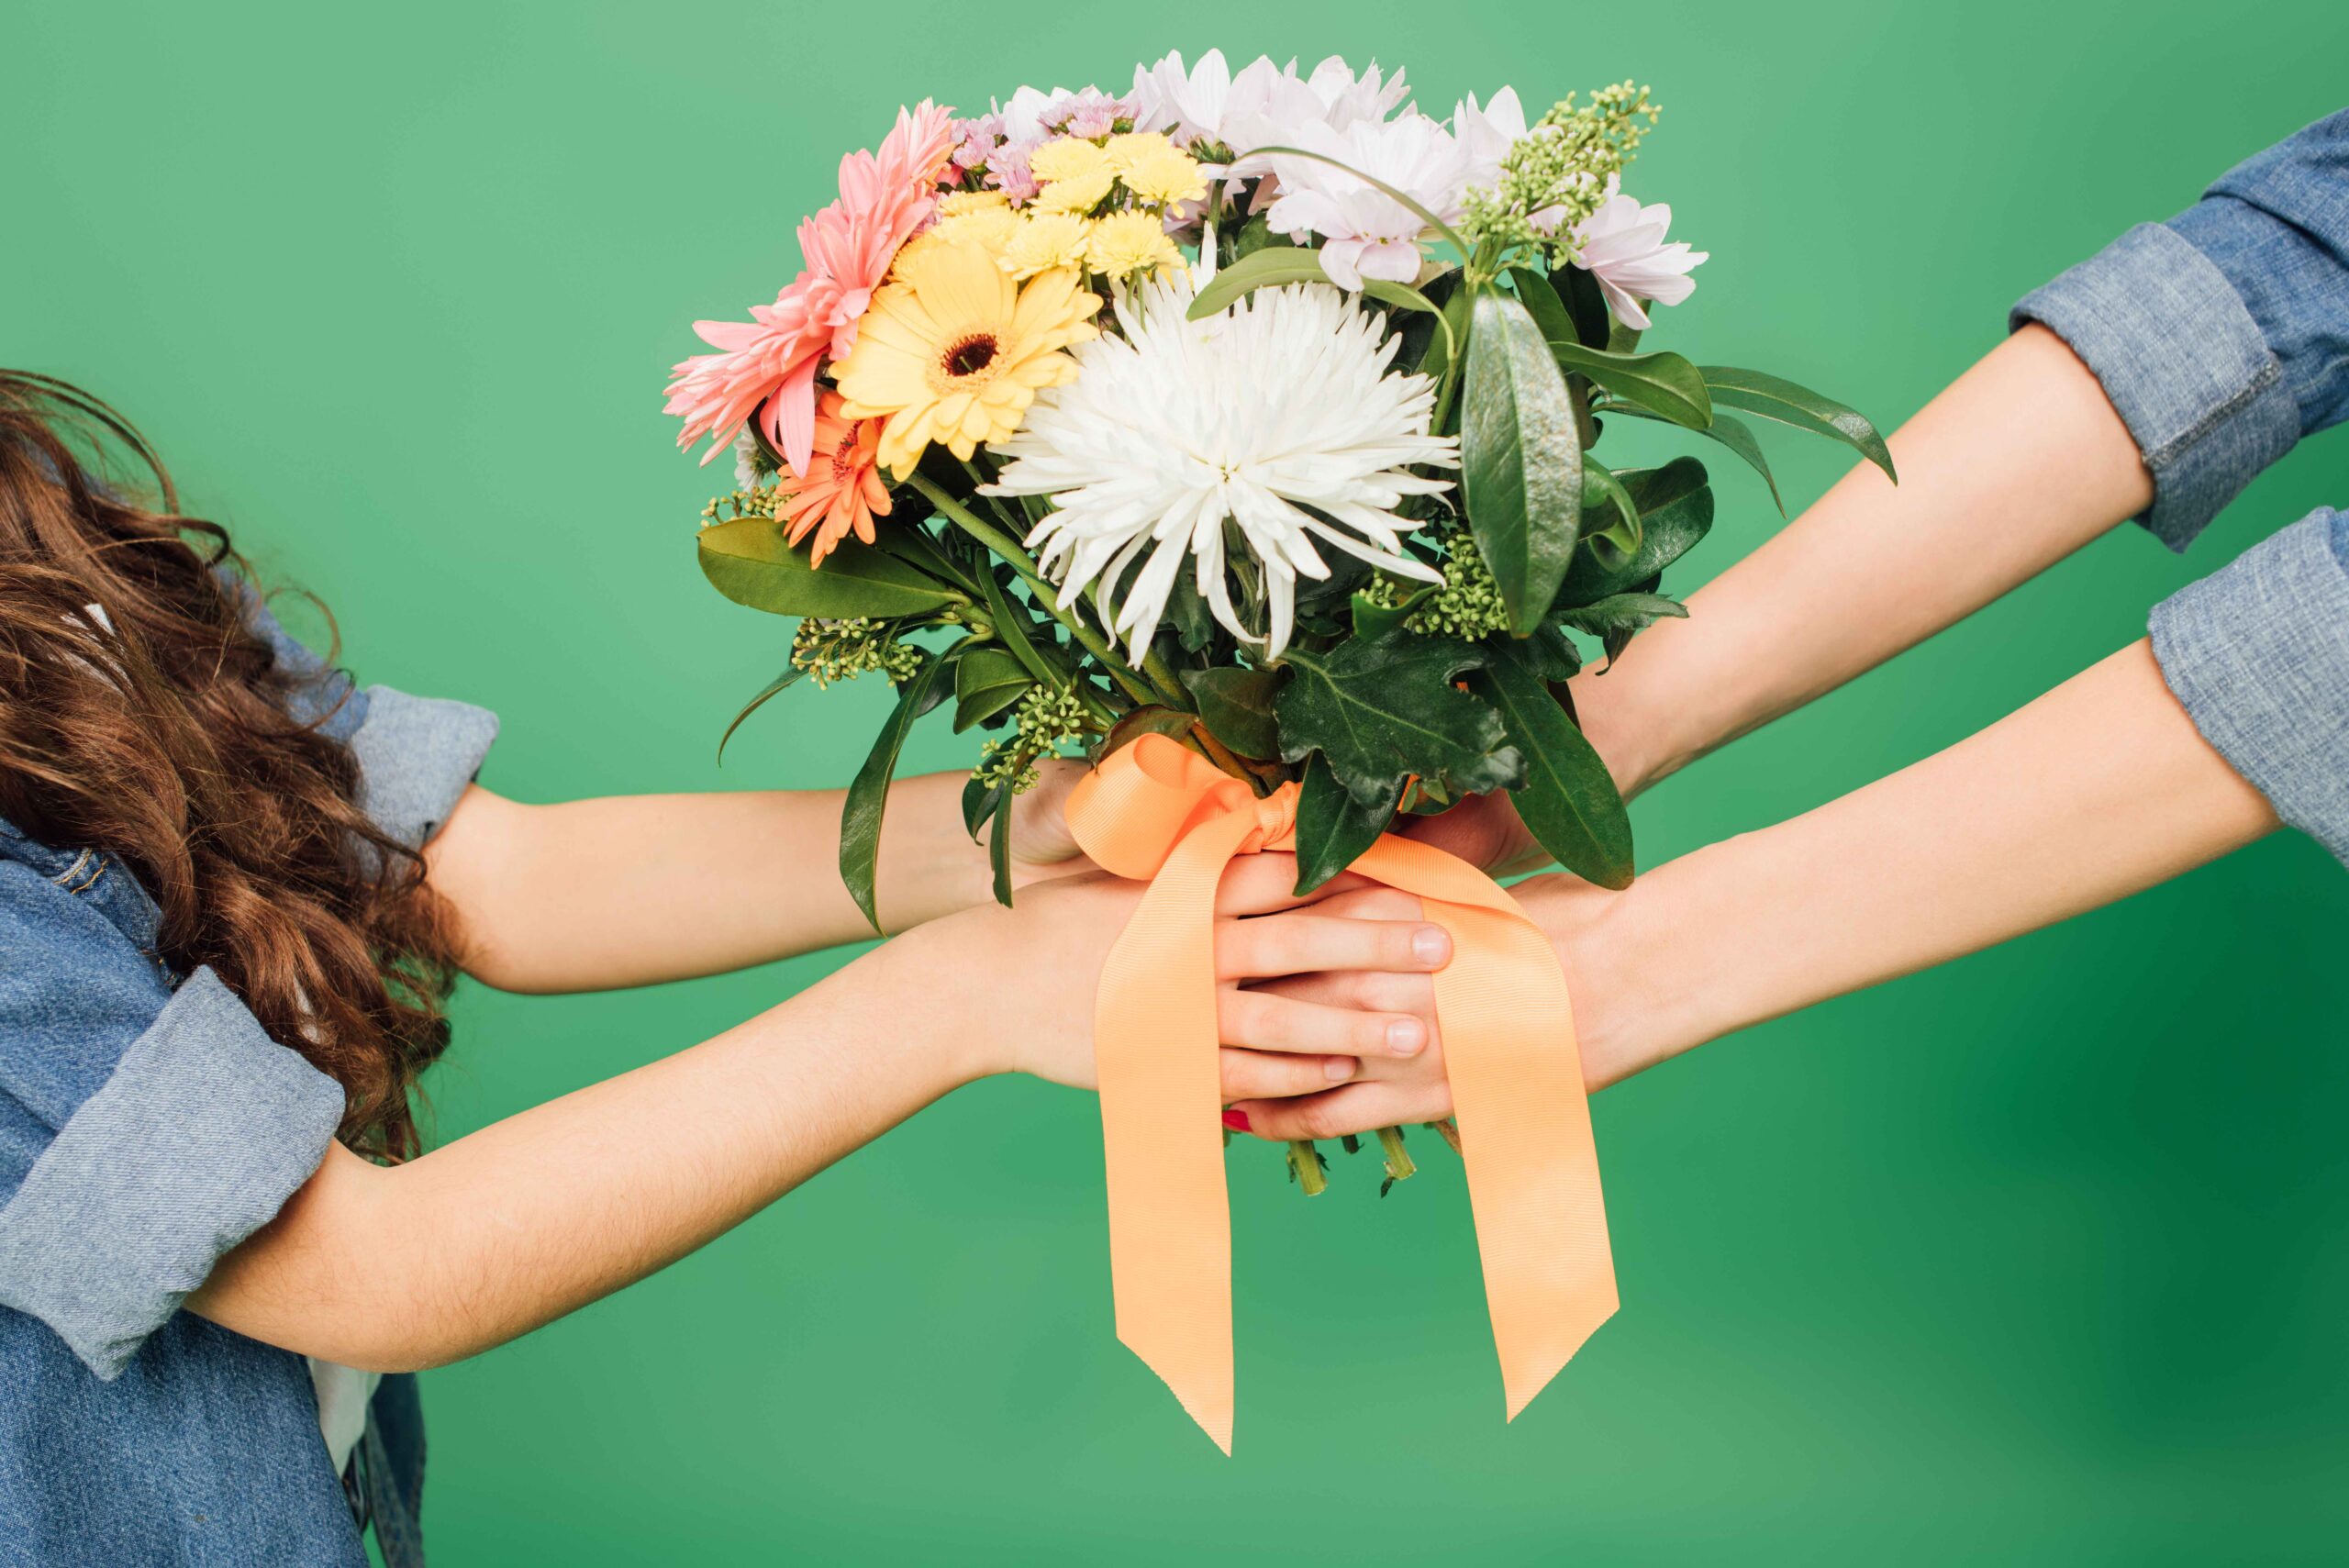 Flower Bouquet Ideas for Teacher’s Day in the Philippines